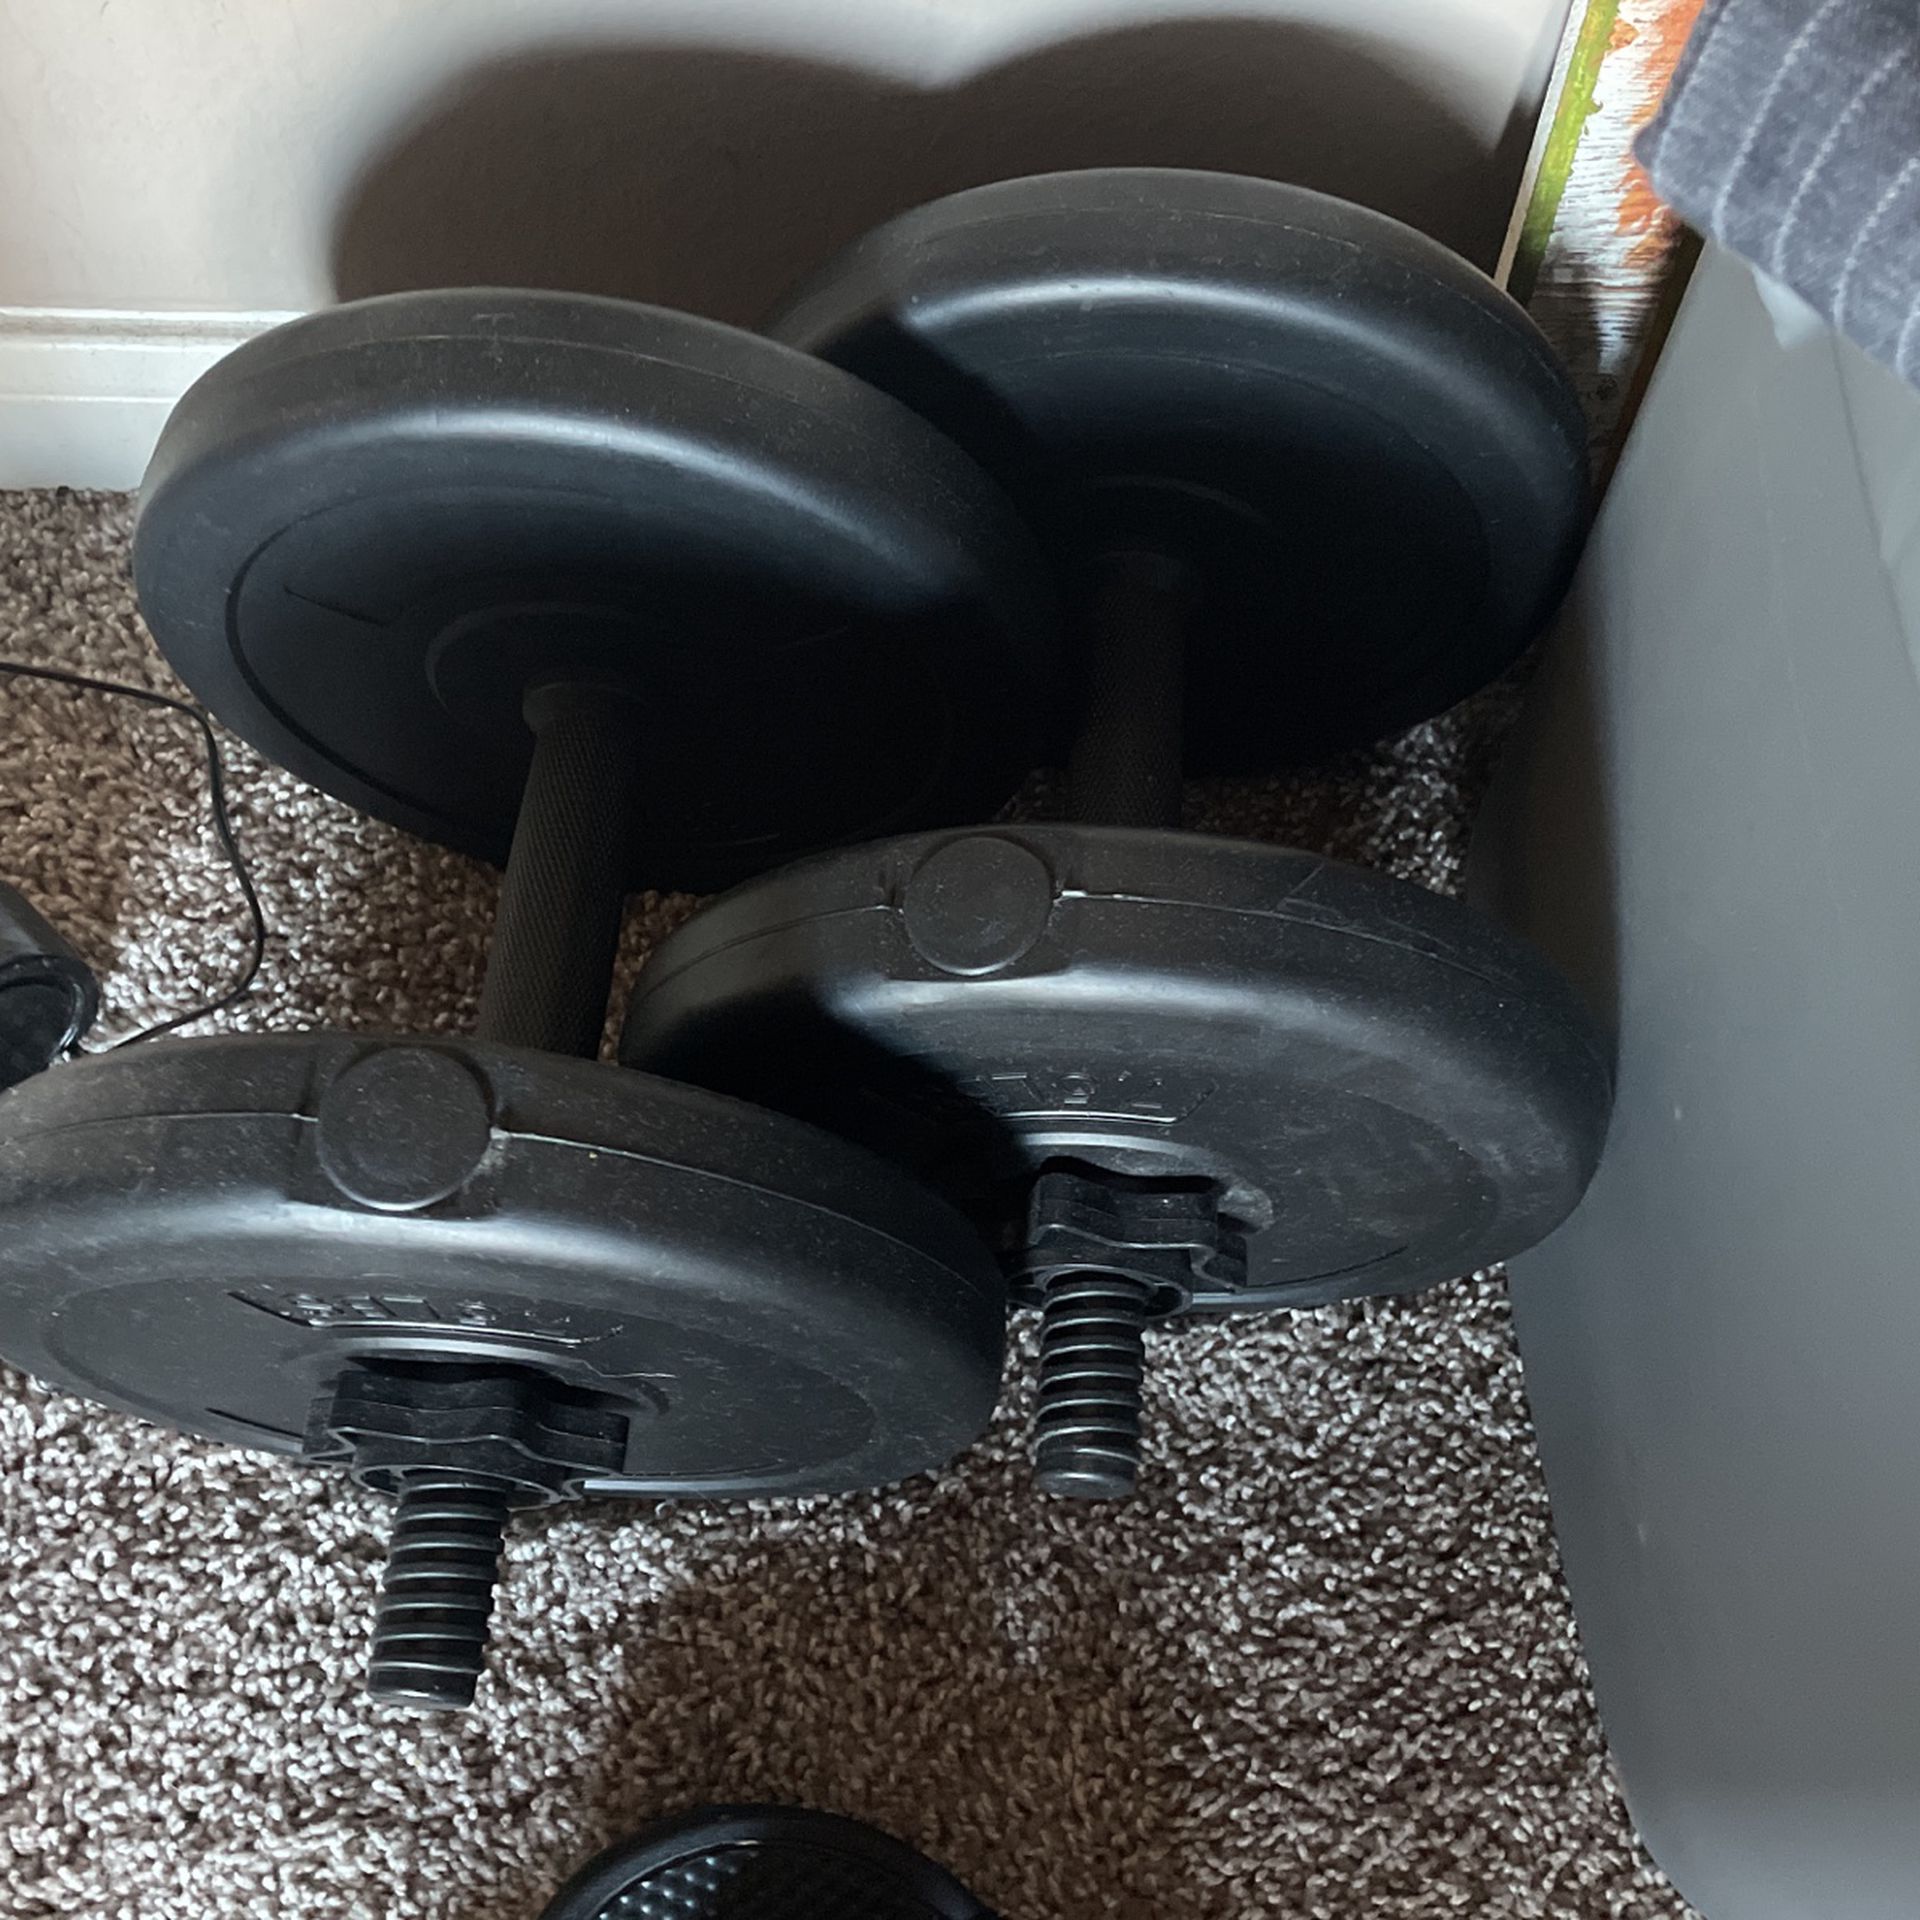 Weights With Four Weight Attachments